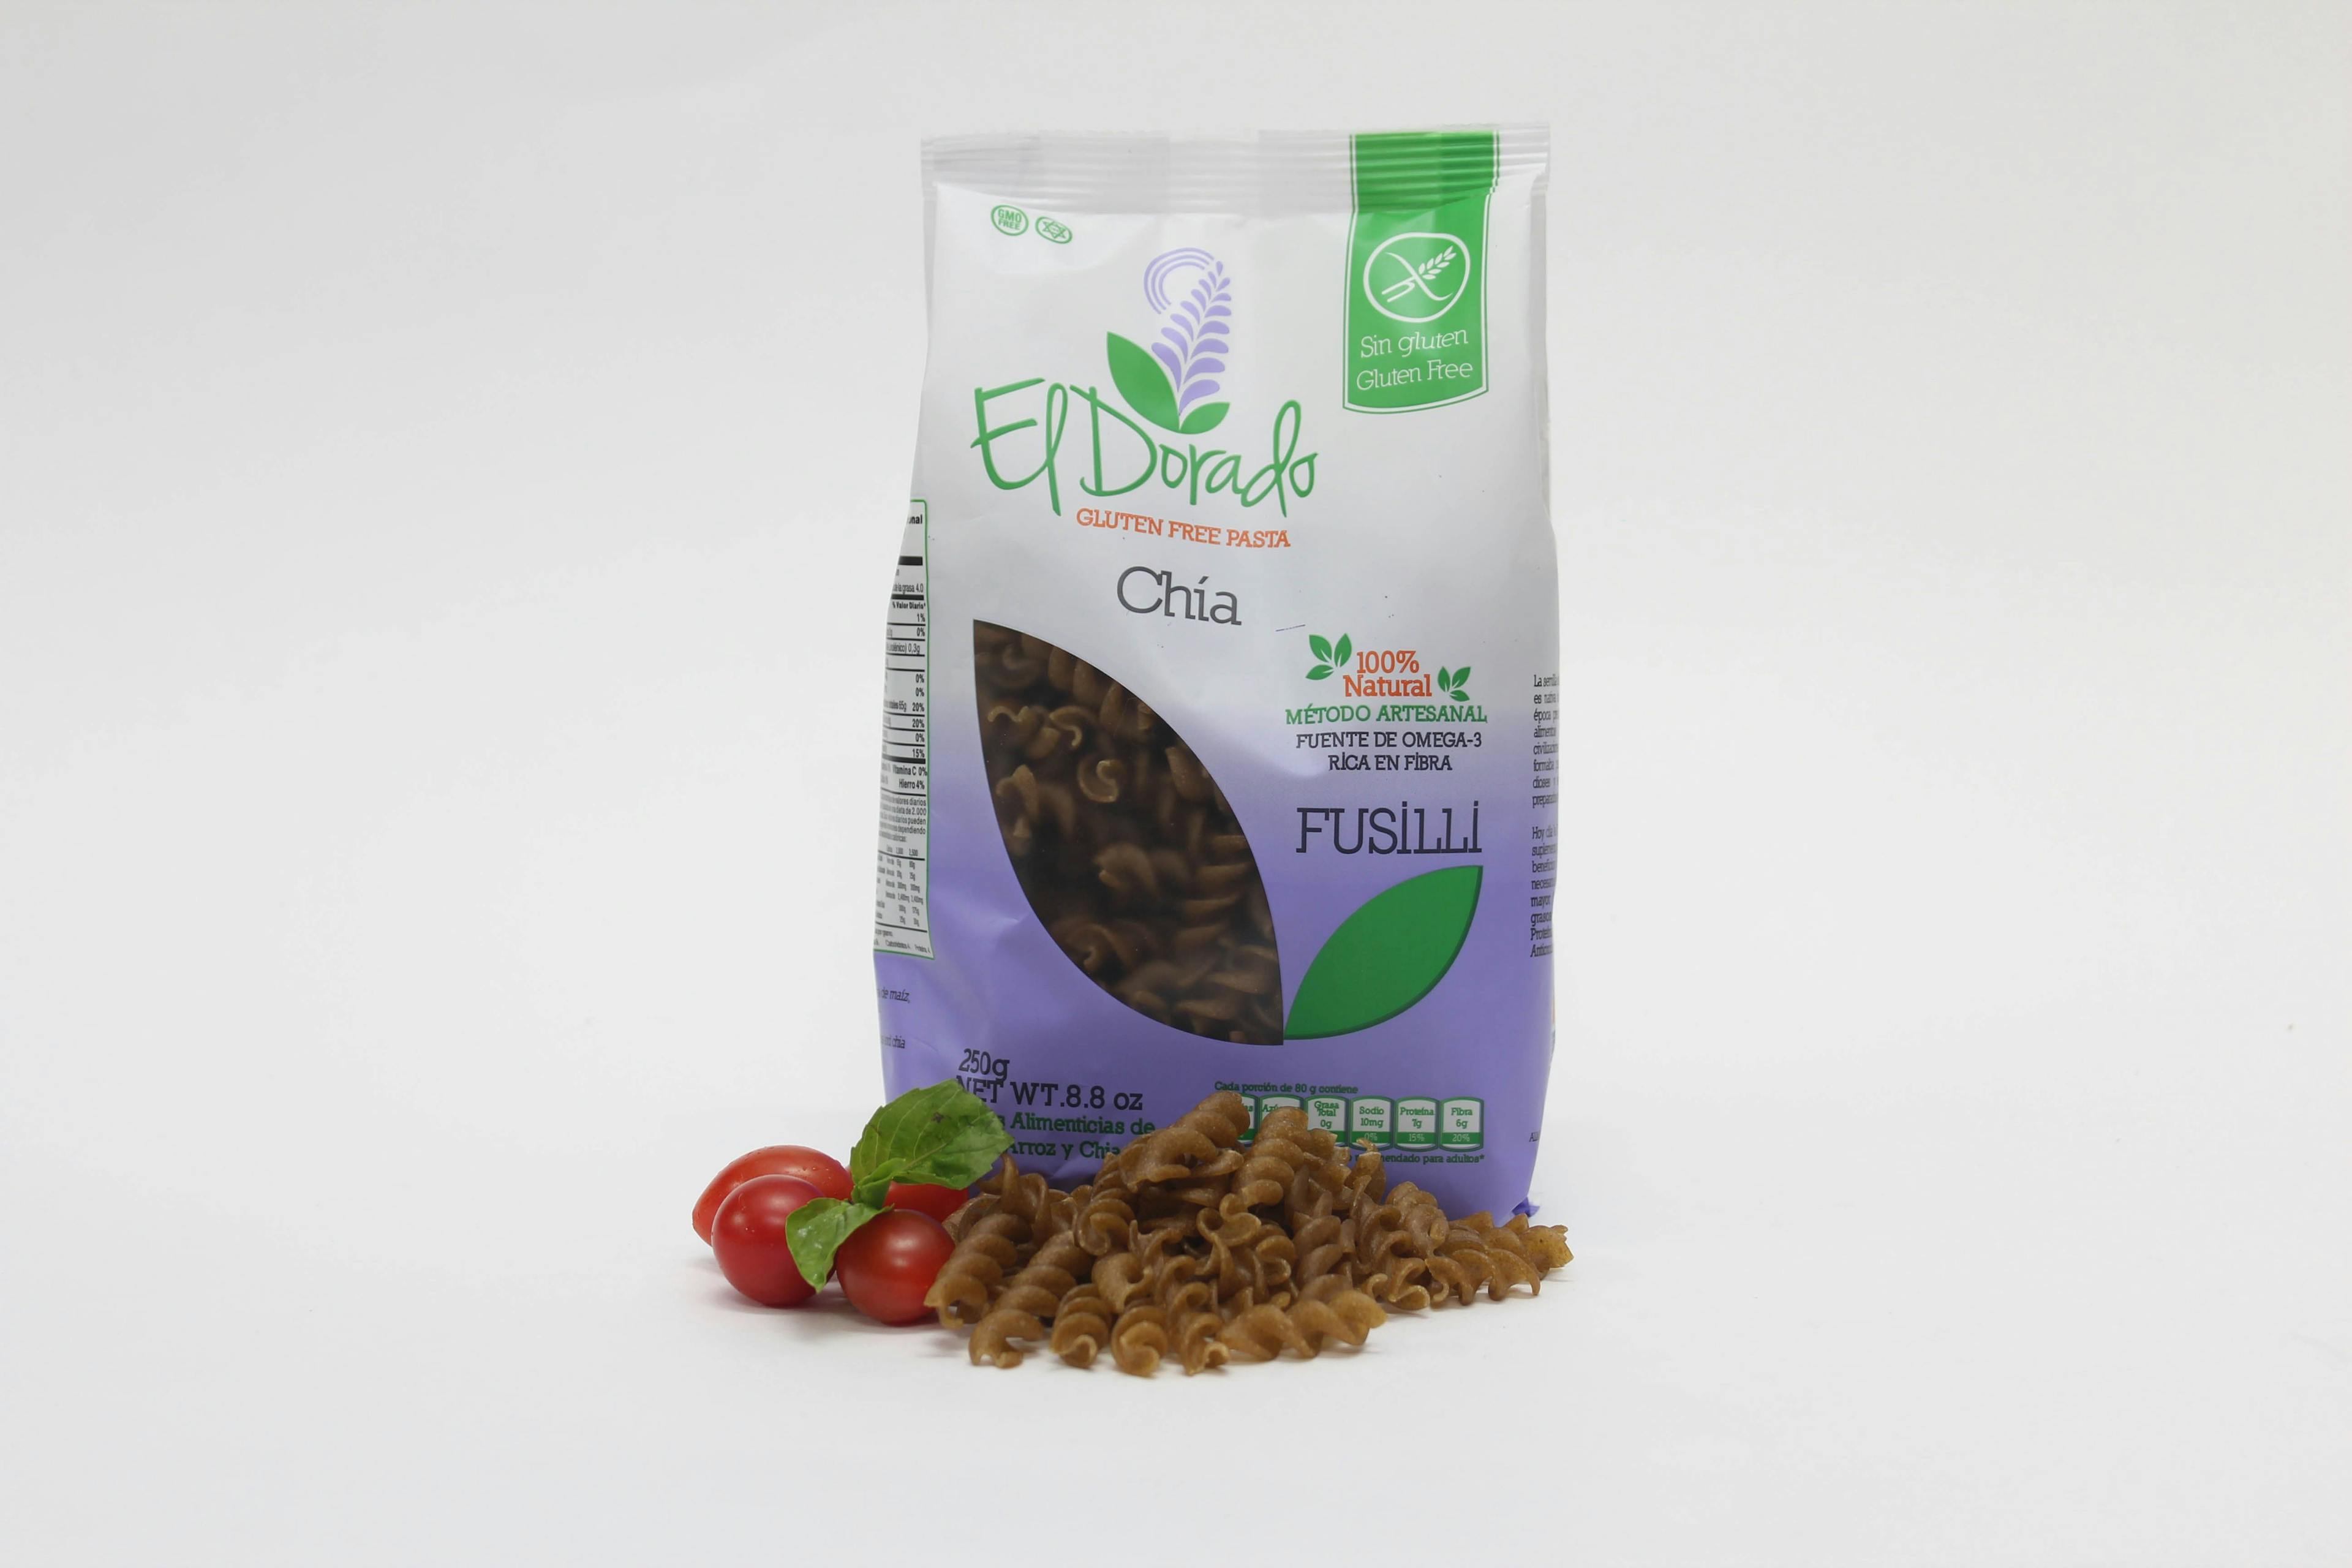 Benexia Promotes Dispersible Chia Powder for Beverages at SupplySide West